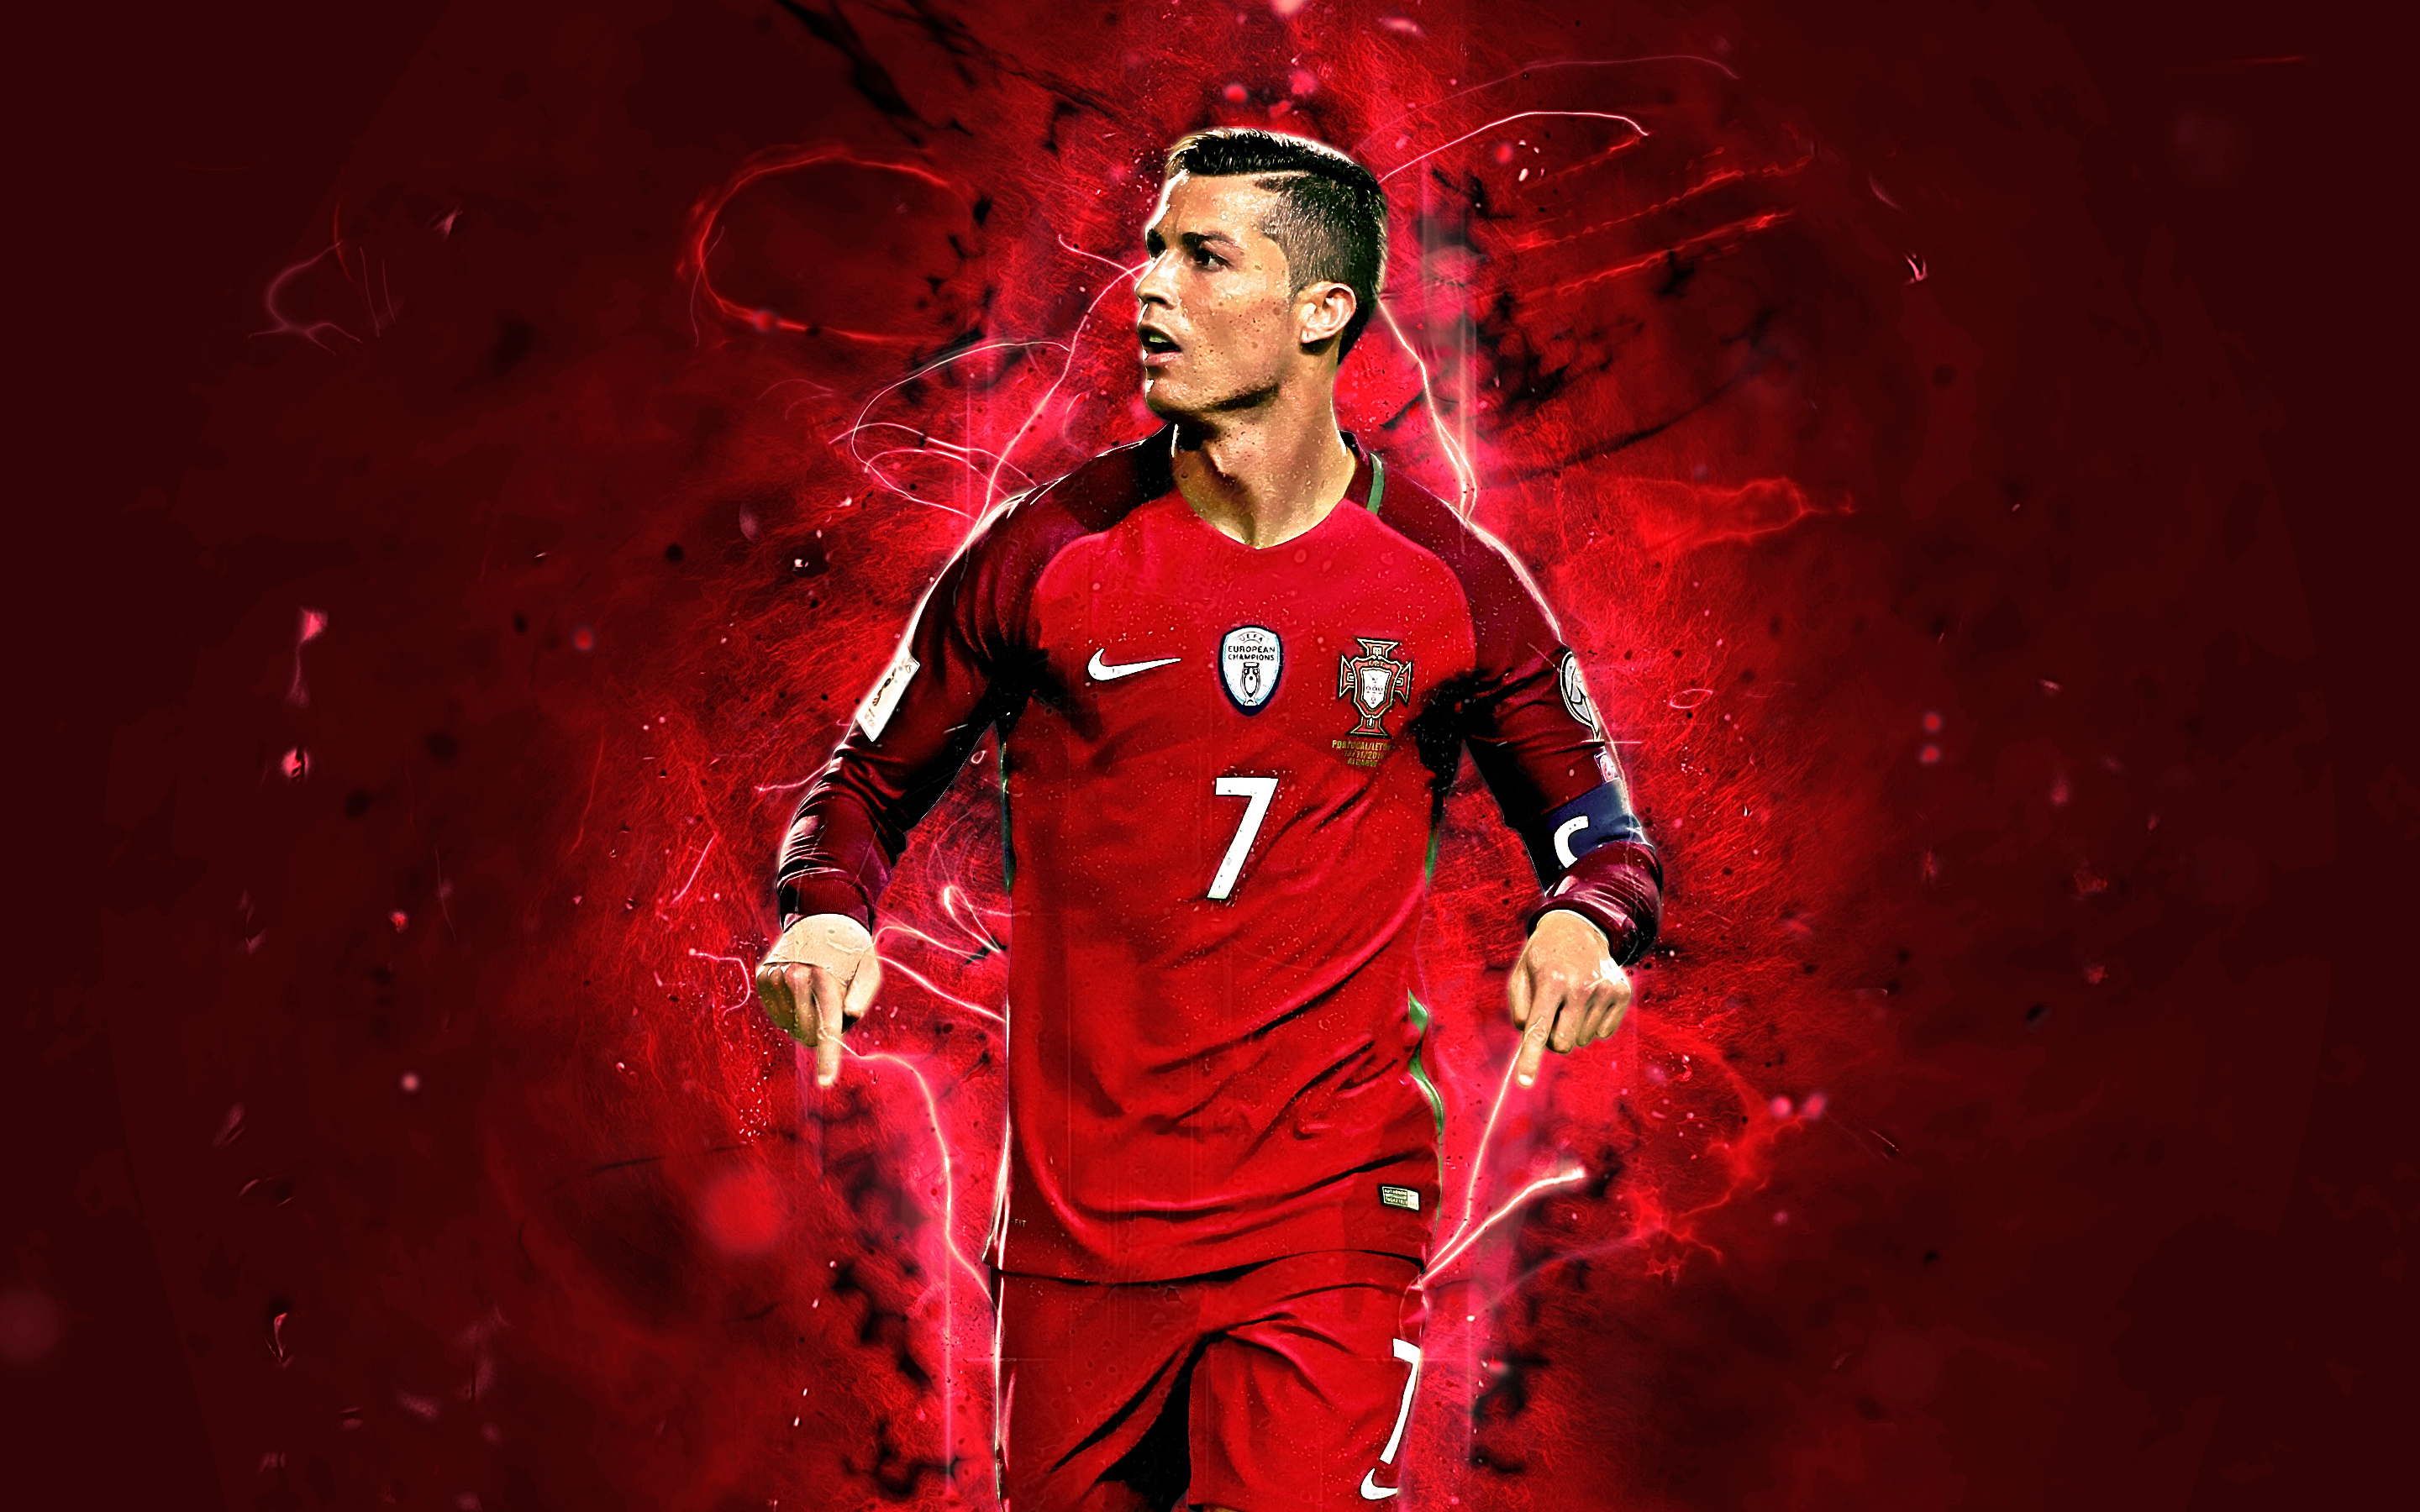 real madrid wallpaper,red,football player,soccer player